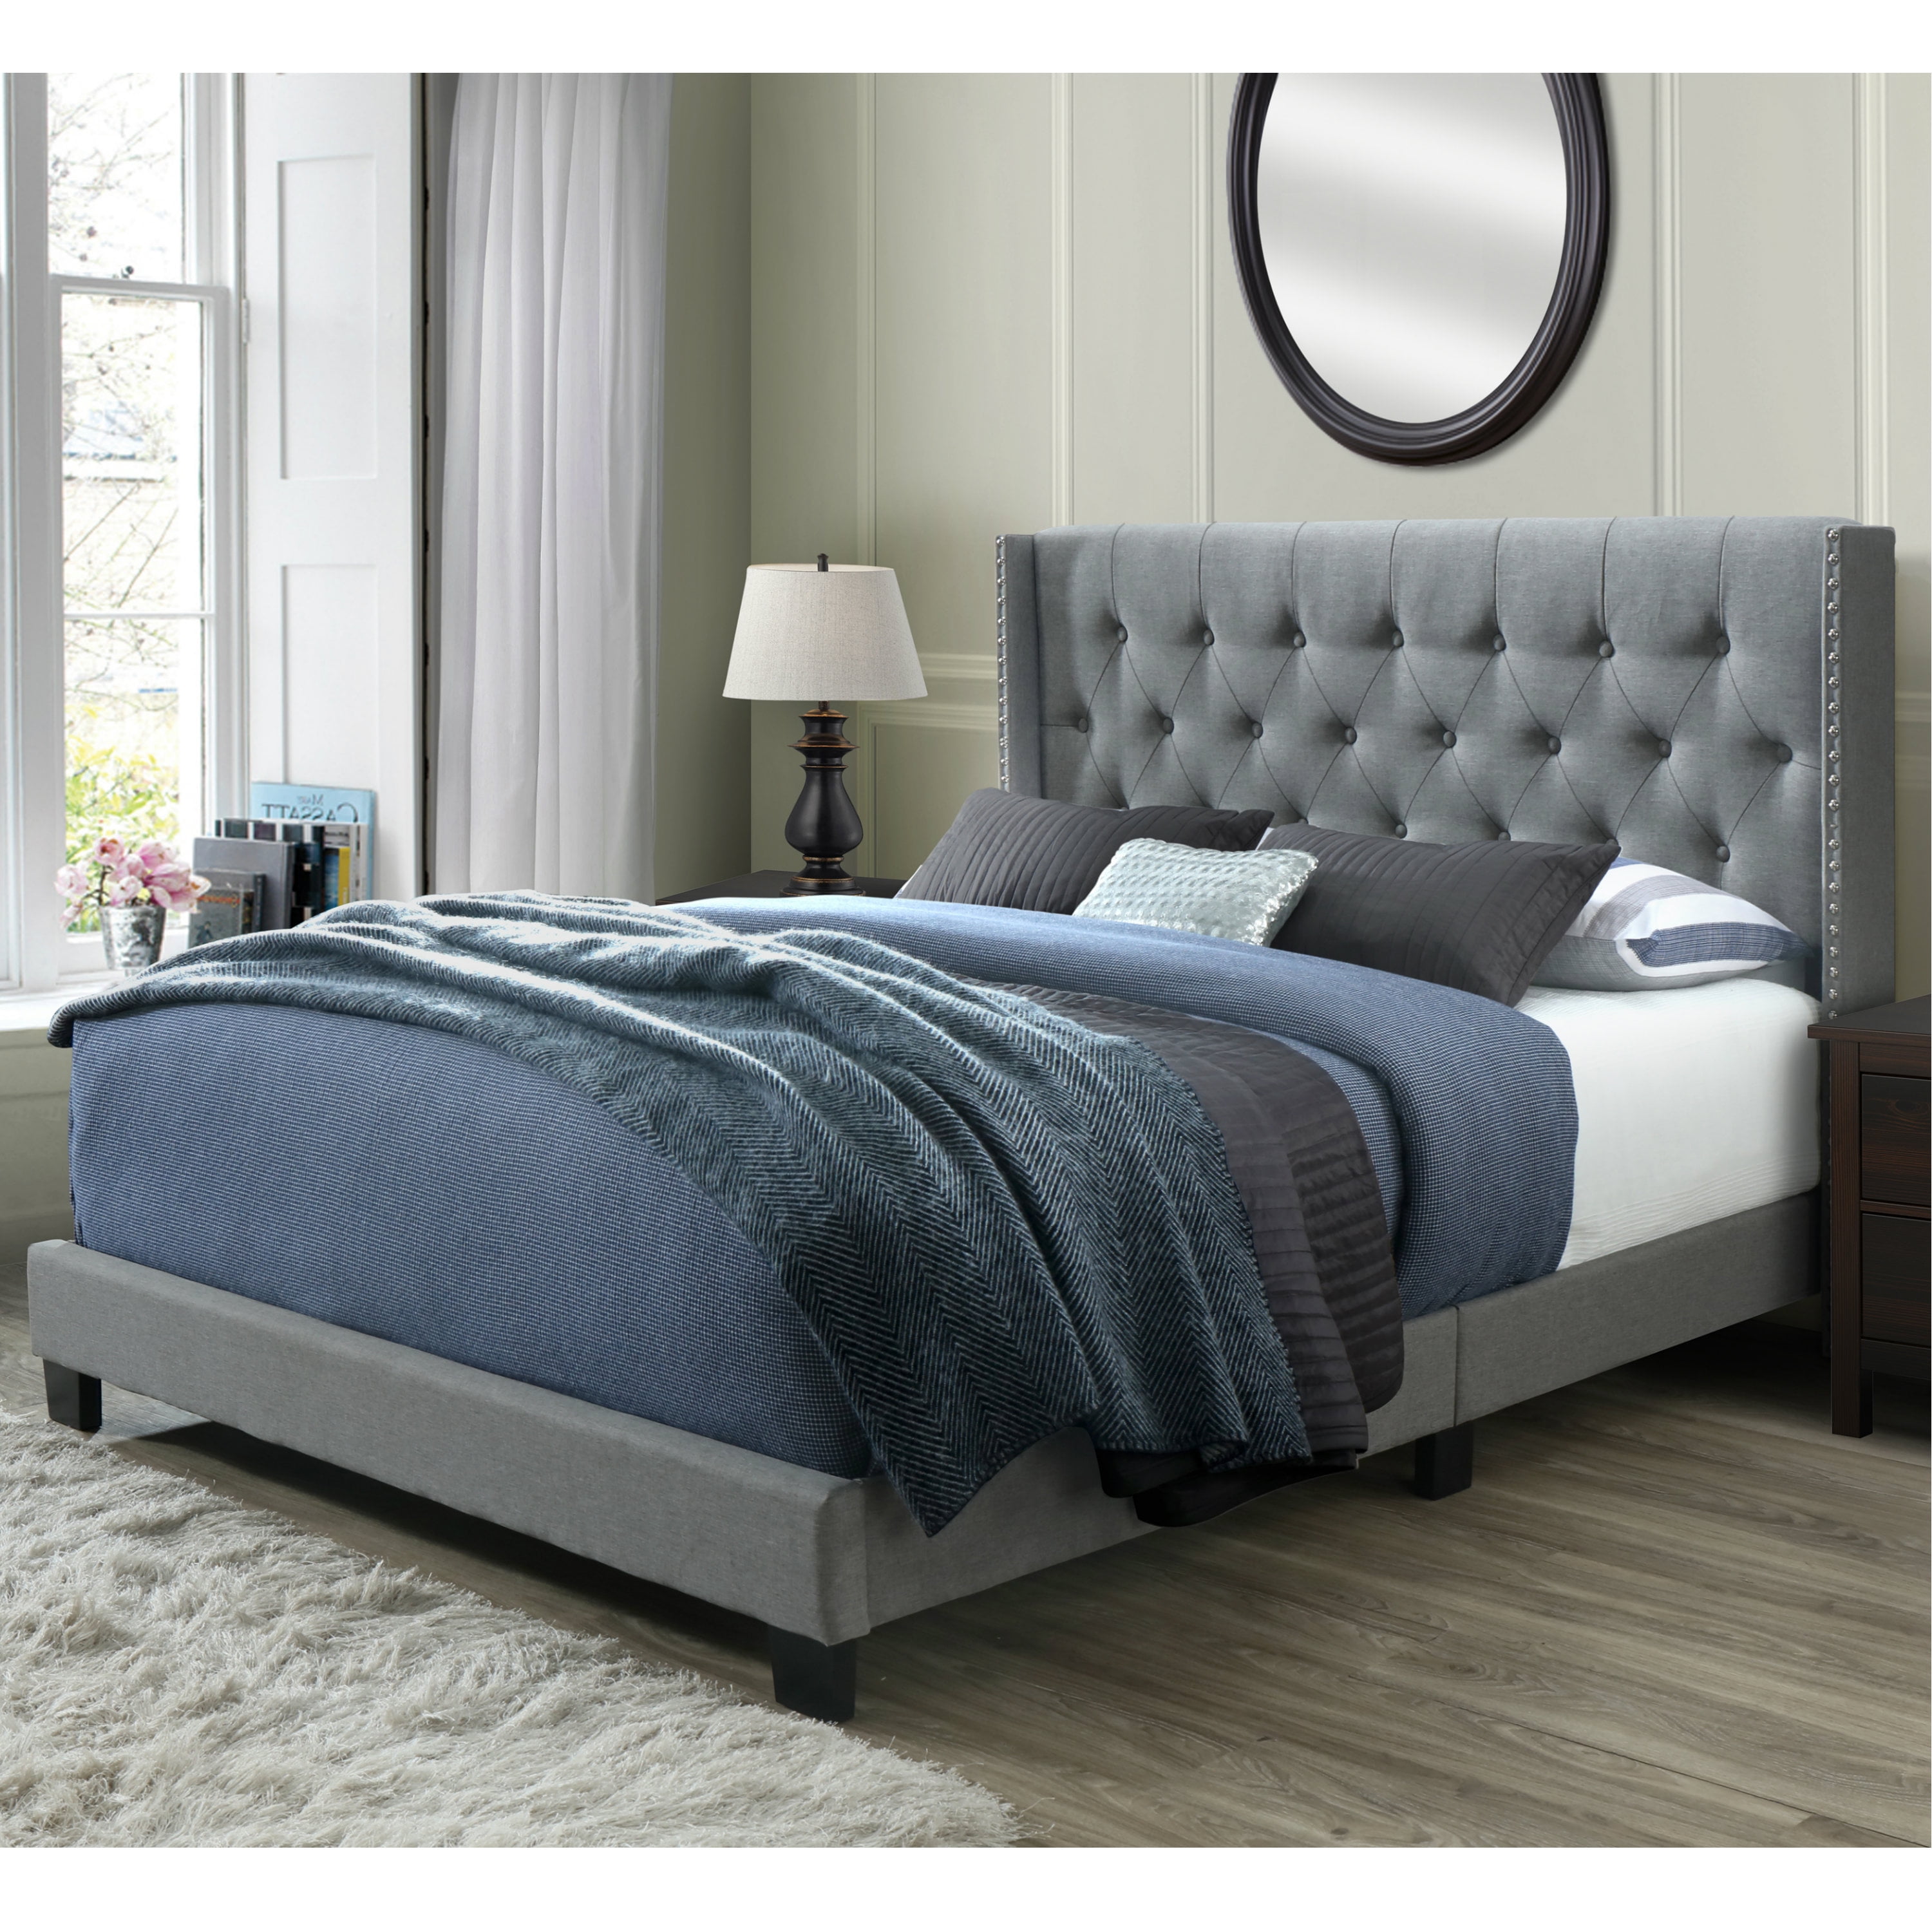 Nailhead Trim Panel Bed Frame, Grey Wingback King Size Bed